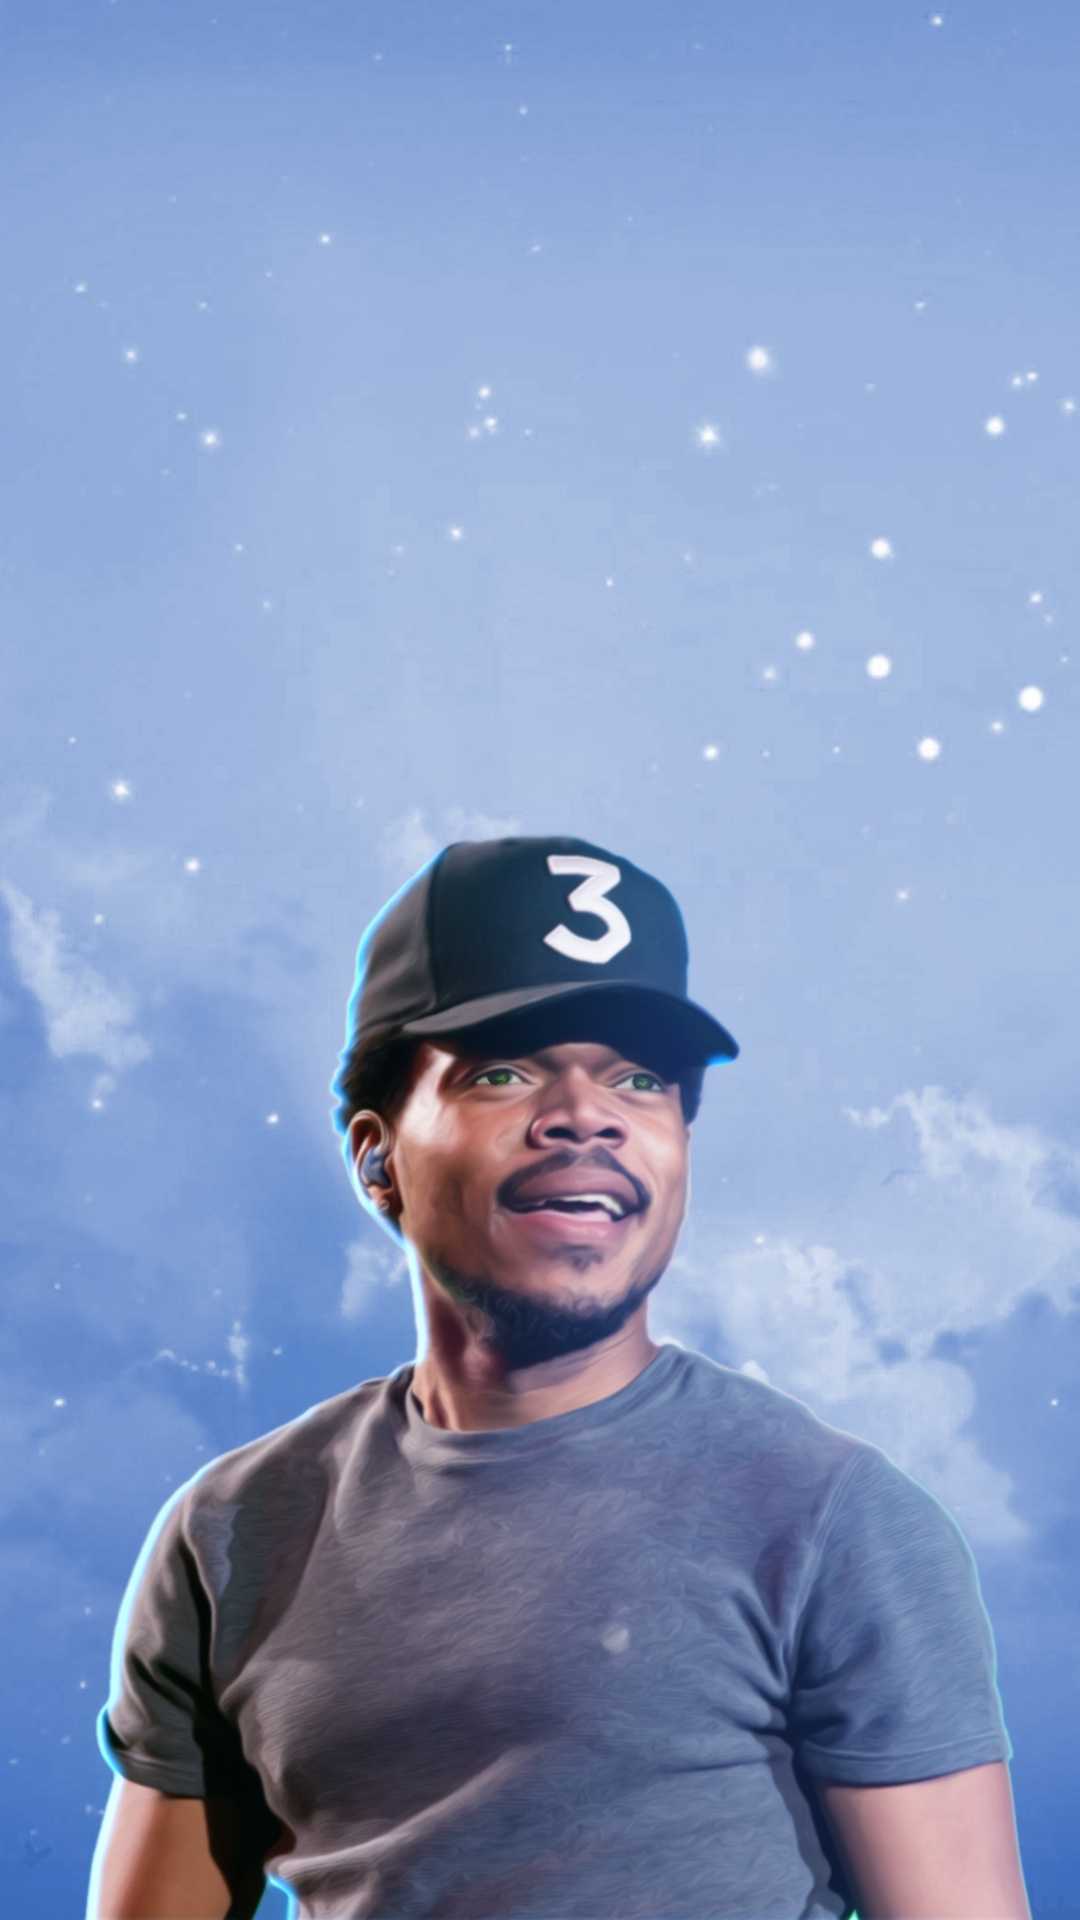 A man wearing sunglasses and holding his hat - Chance the Rapper